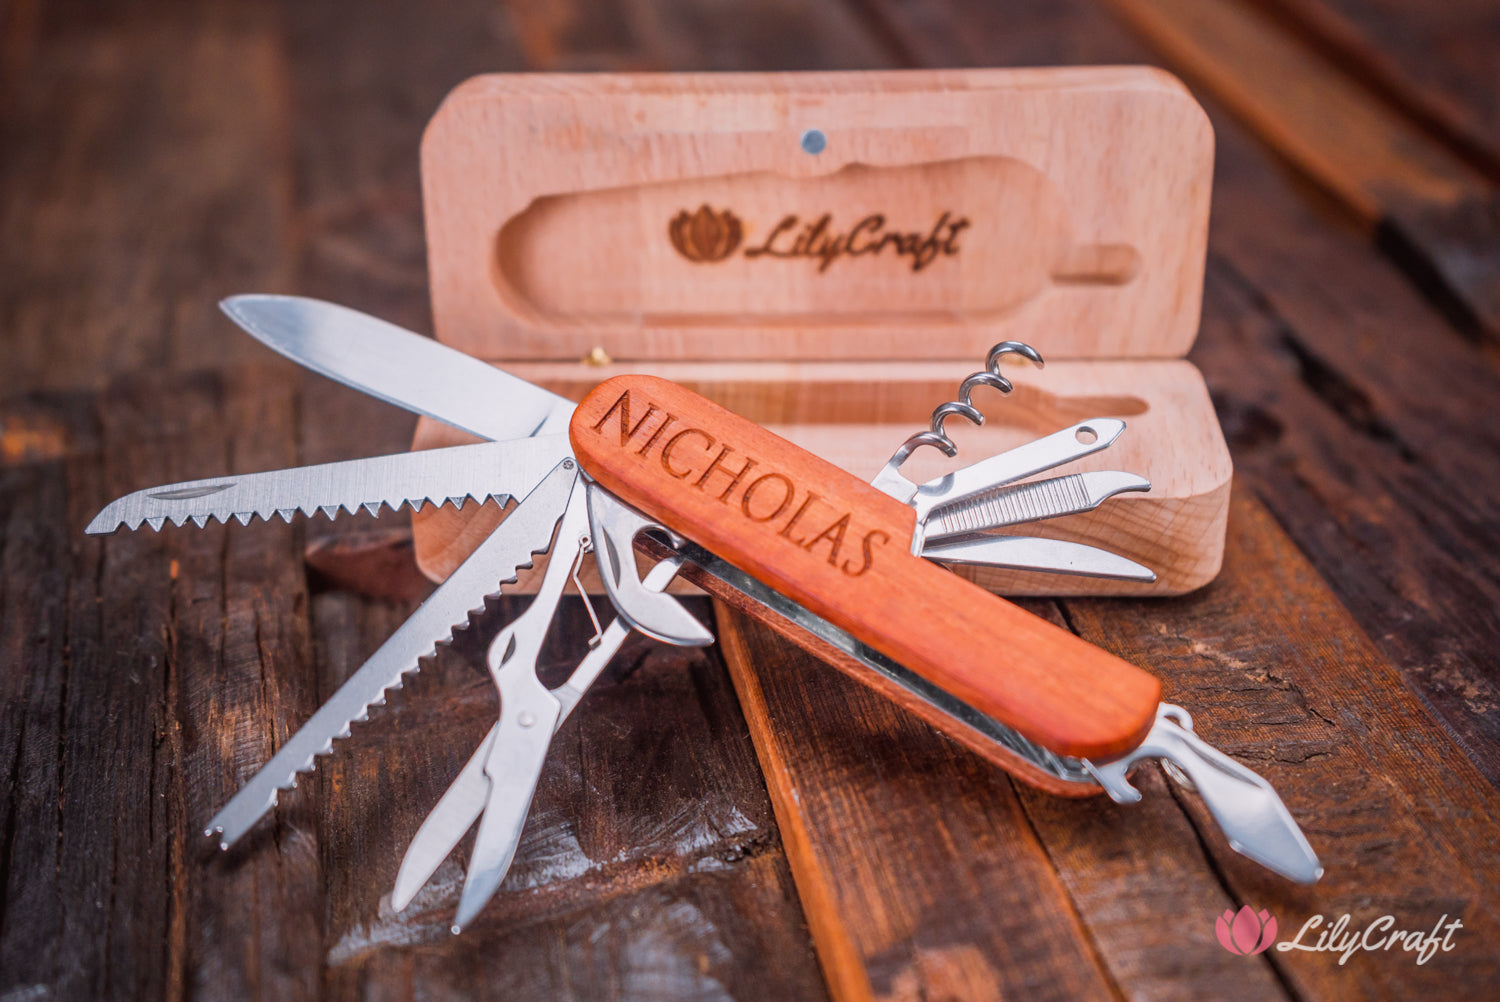 Swiss Army style Pocket Knife with Wooden Gift Box - Versatile and Personalised